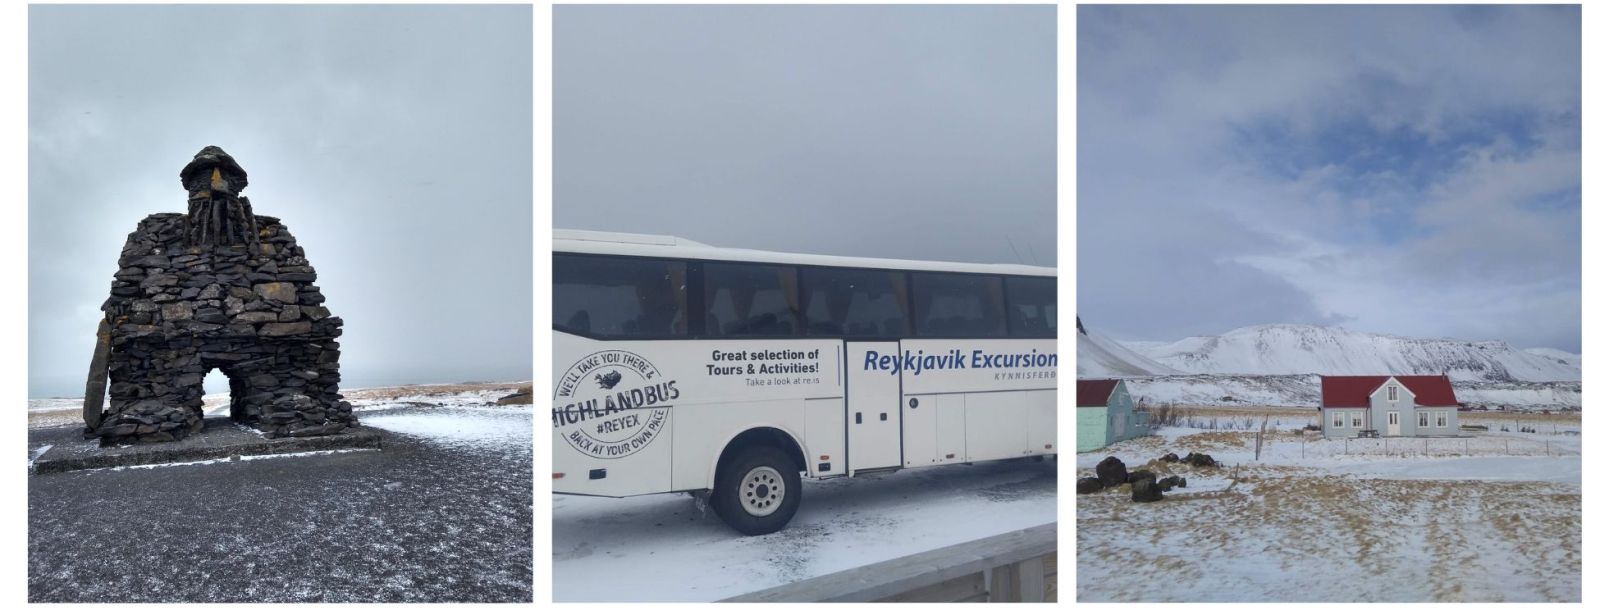 Holidays To Iceland. Excursions To Iceland